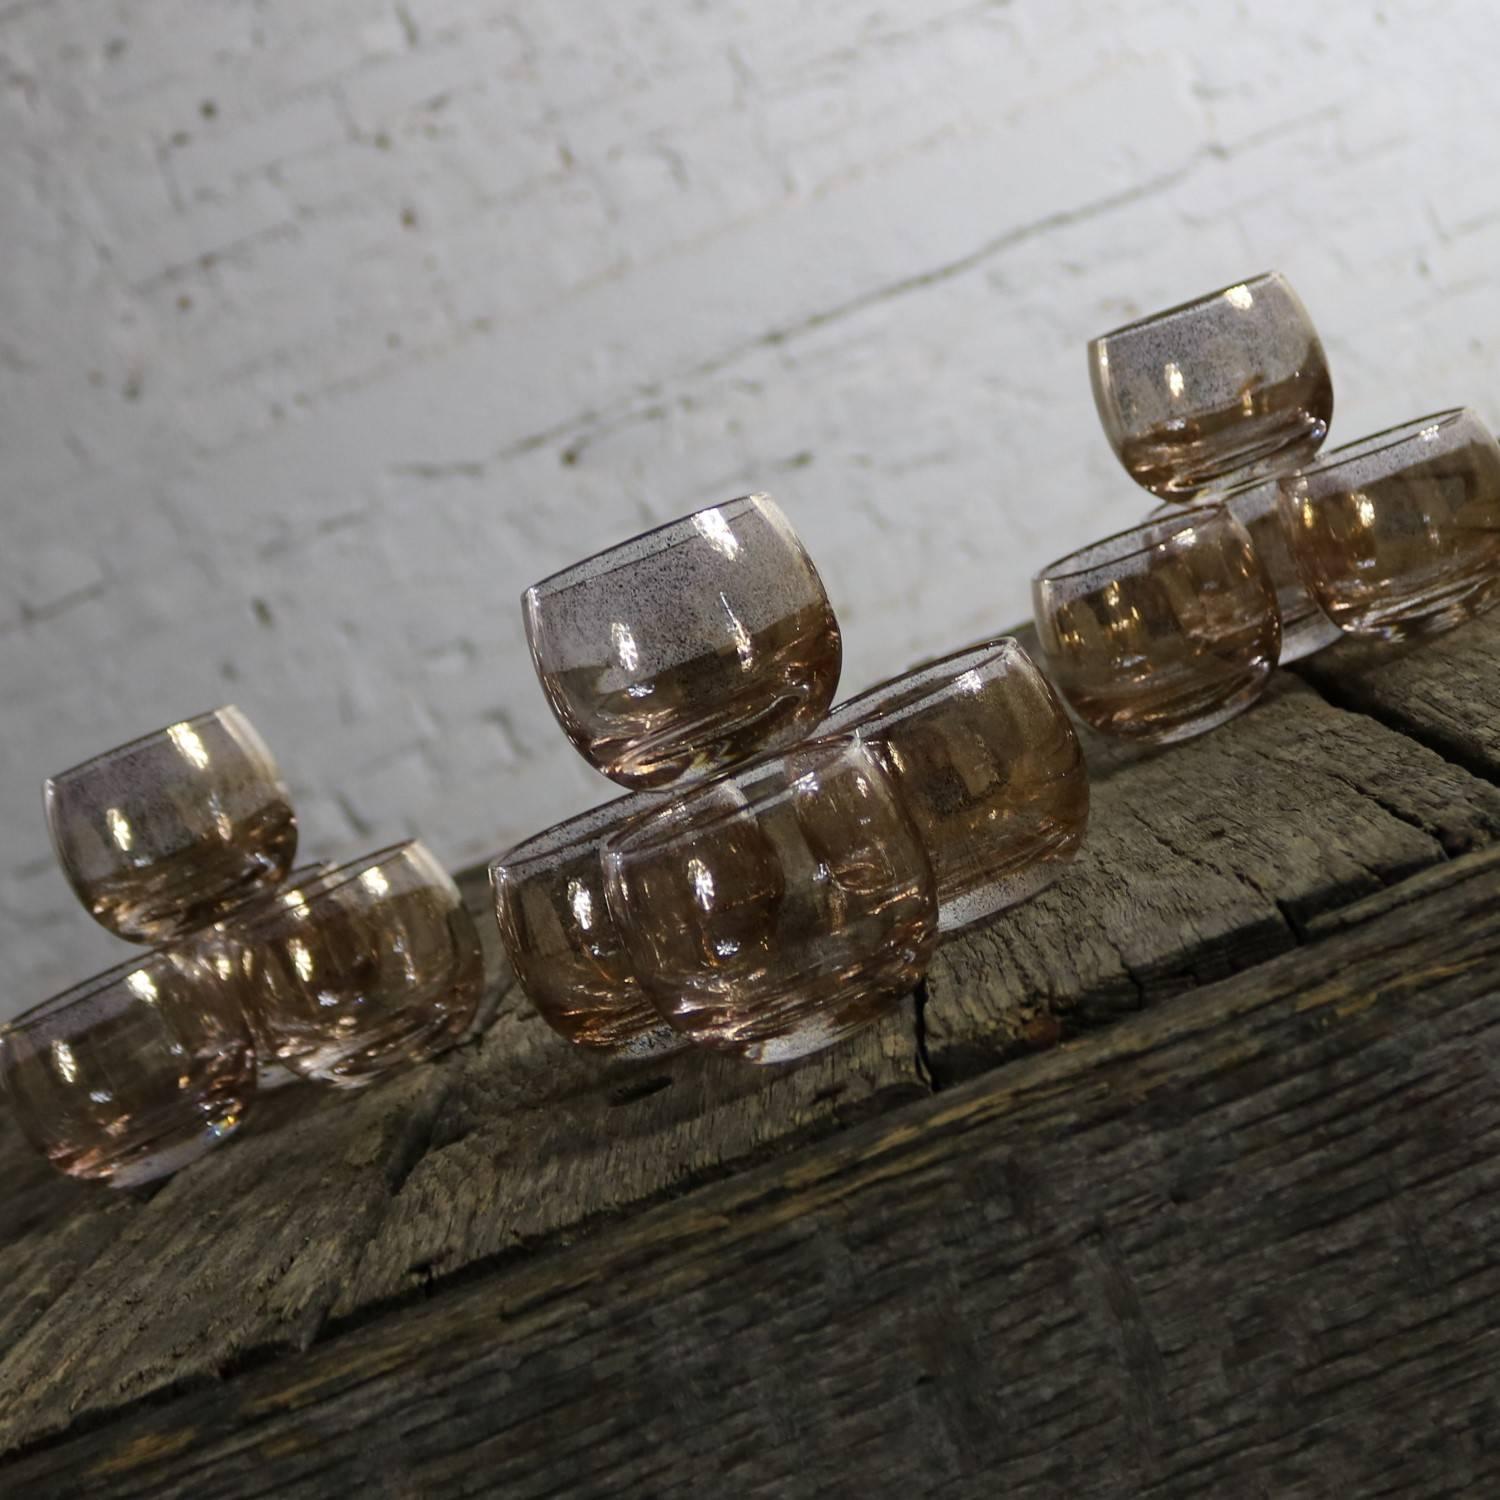 A Mid-Century Modern set of 12 small roly poly cocktail glasses with a gold speckled finish in the style and manner of Dorothy Thorpe. All 12 are in wonderful vintage condition, circa 1950s-1960s.

Fabulous set of 12 of the most wonderful little